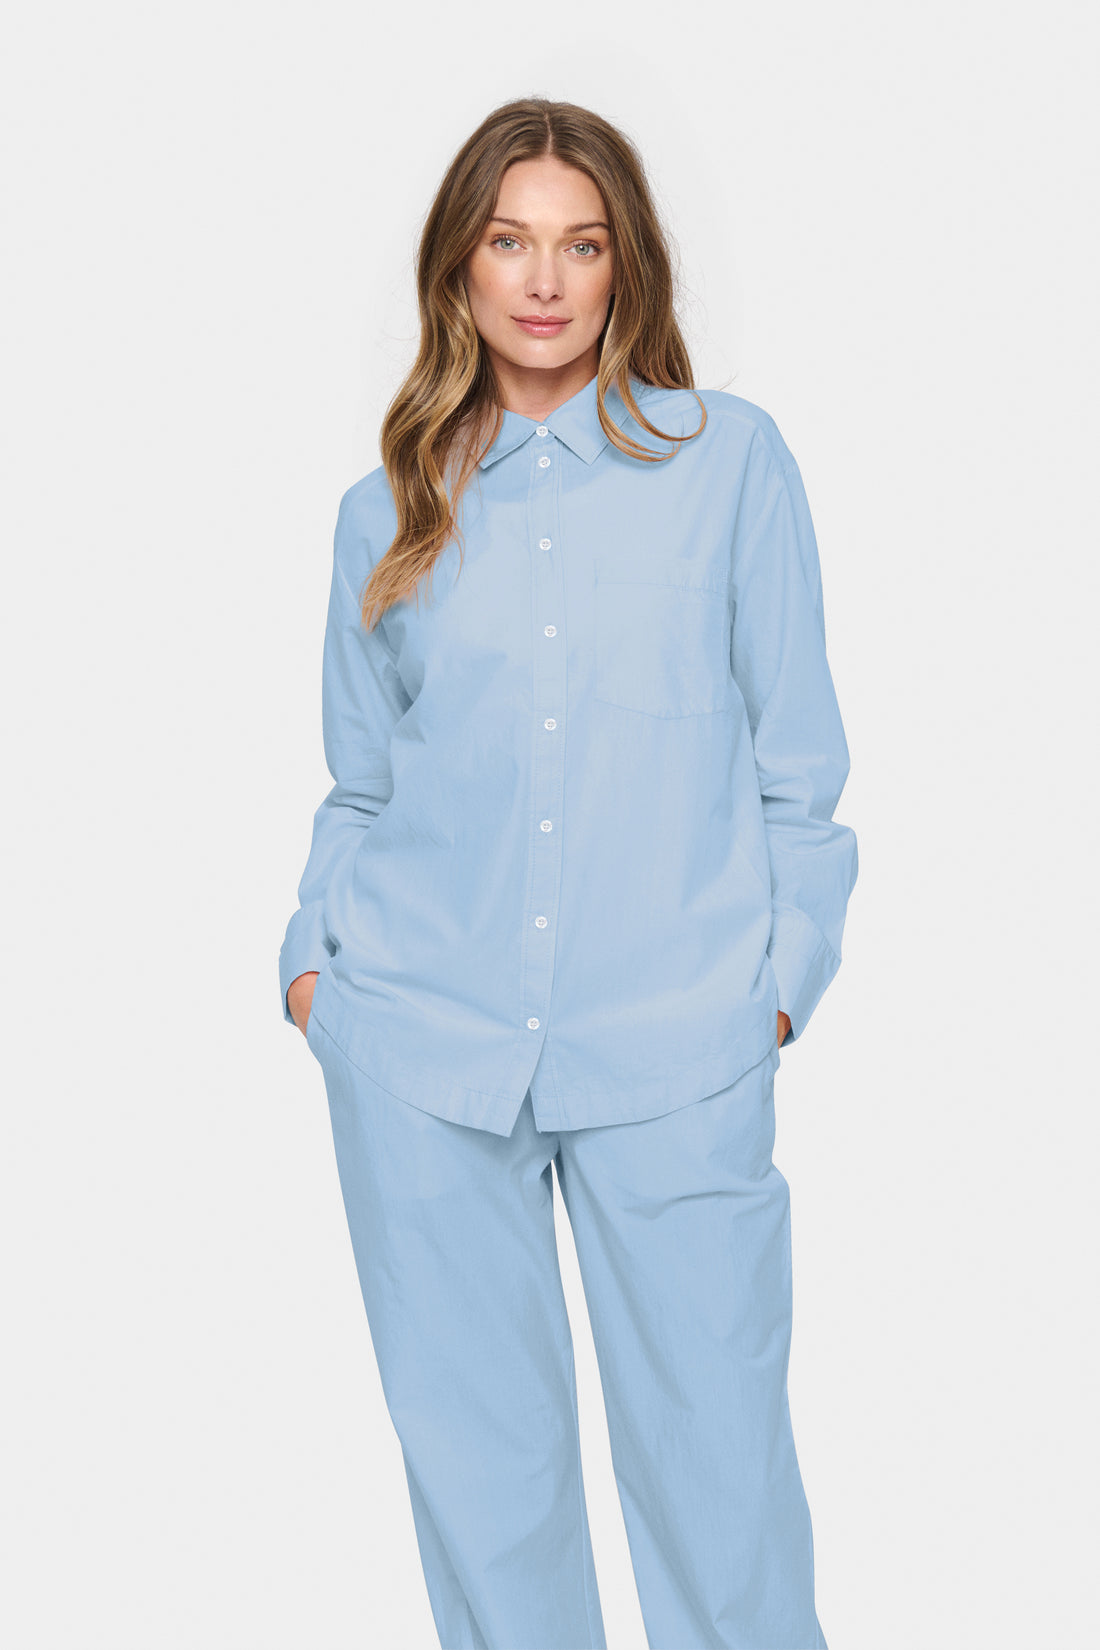 Saint Tropez Findre Shirt in Chambray